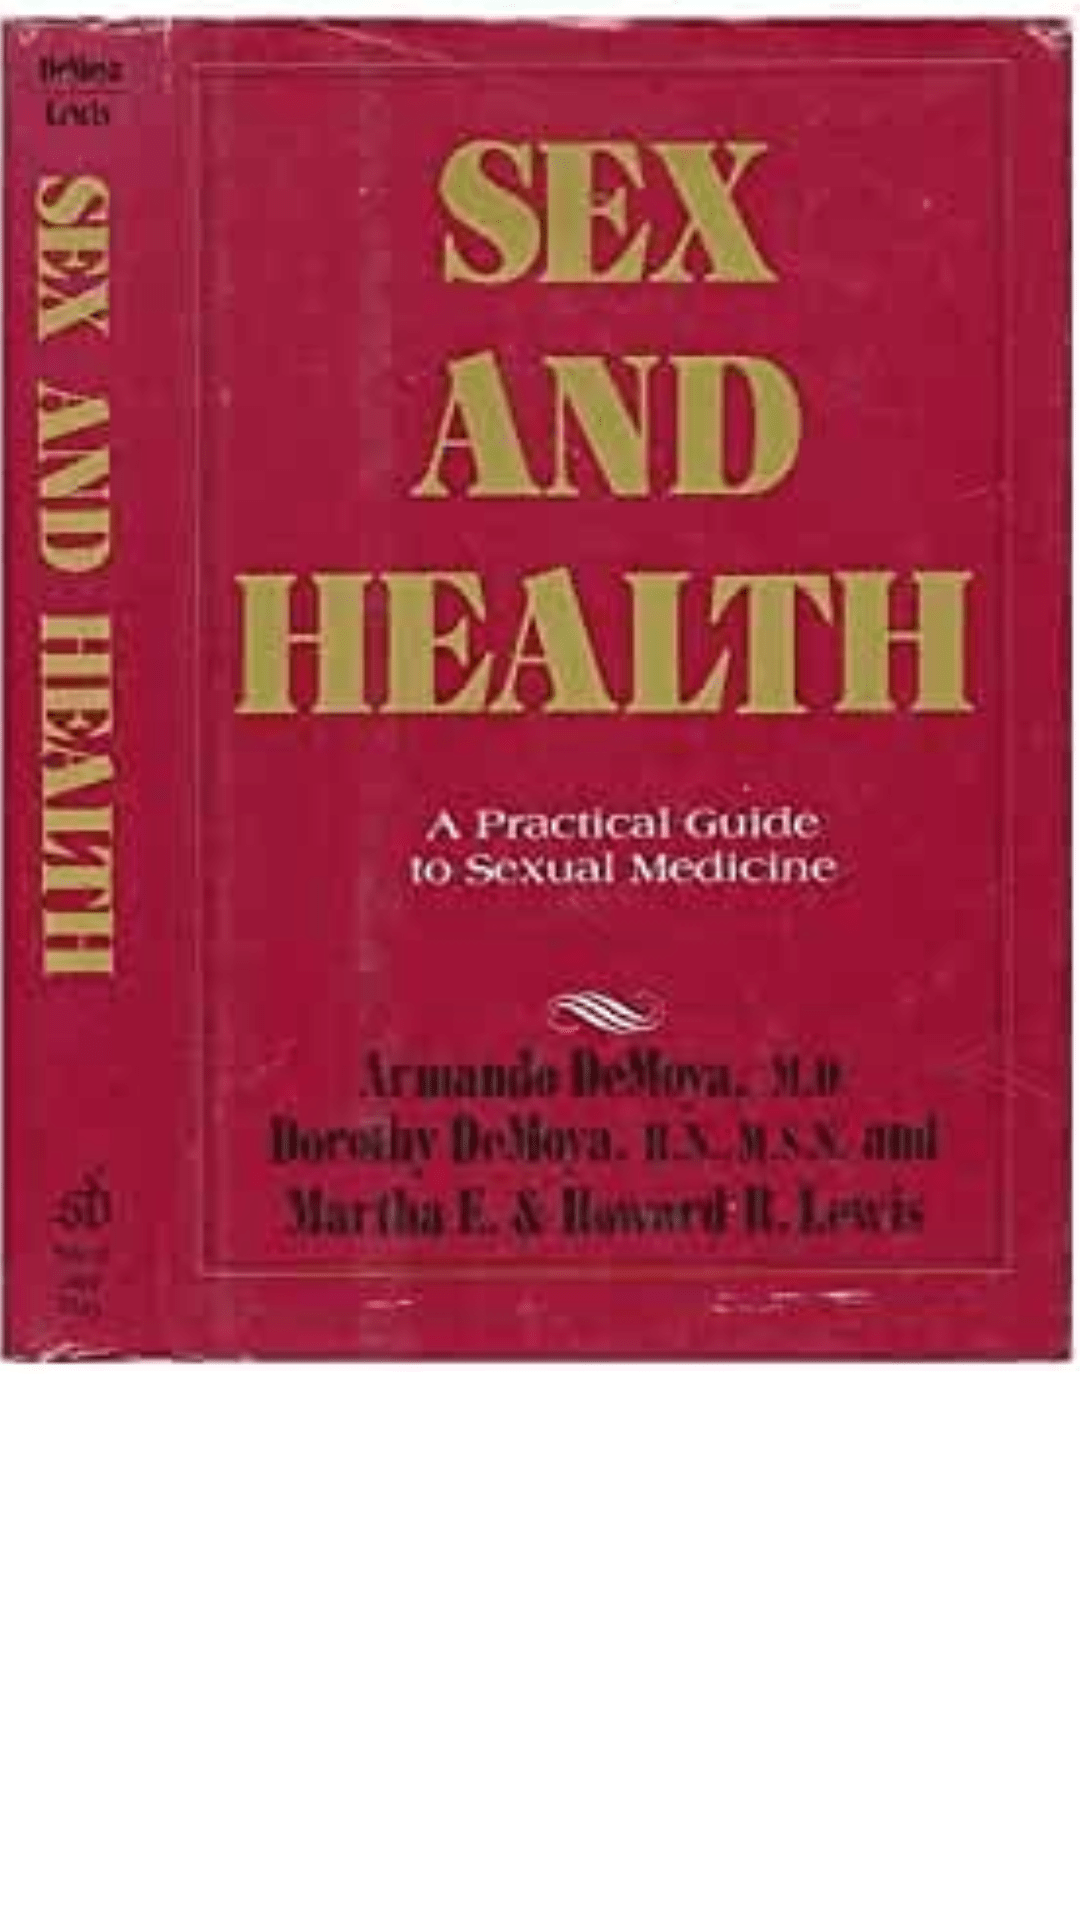 Sex and Health: A Practical Guide to Sexual Medicine